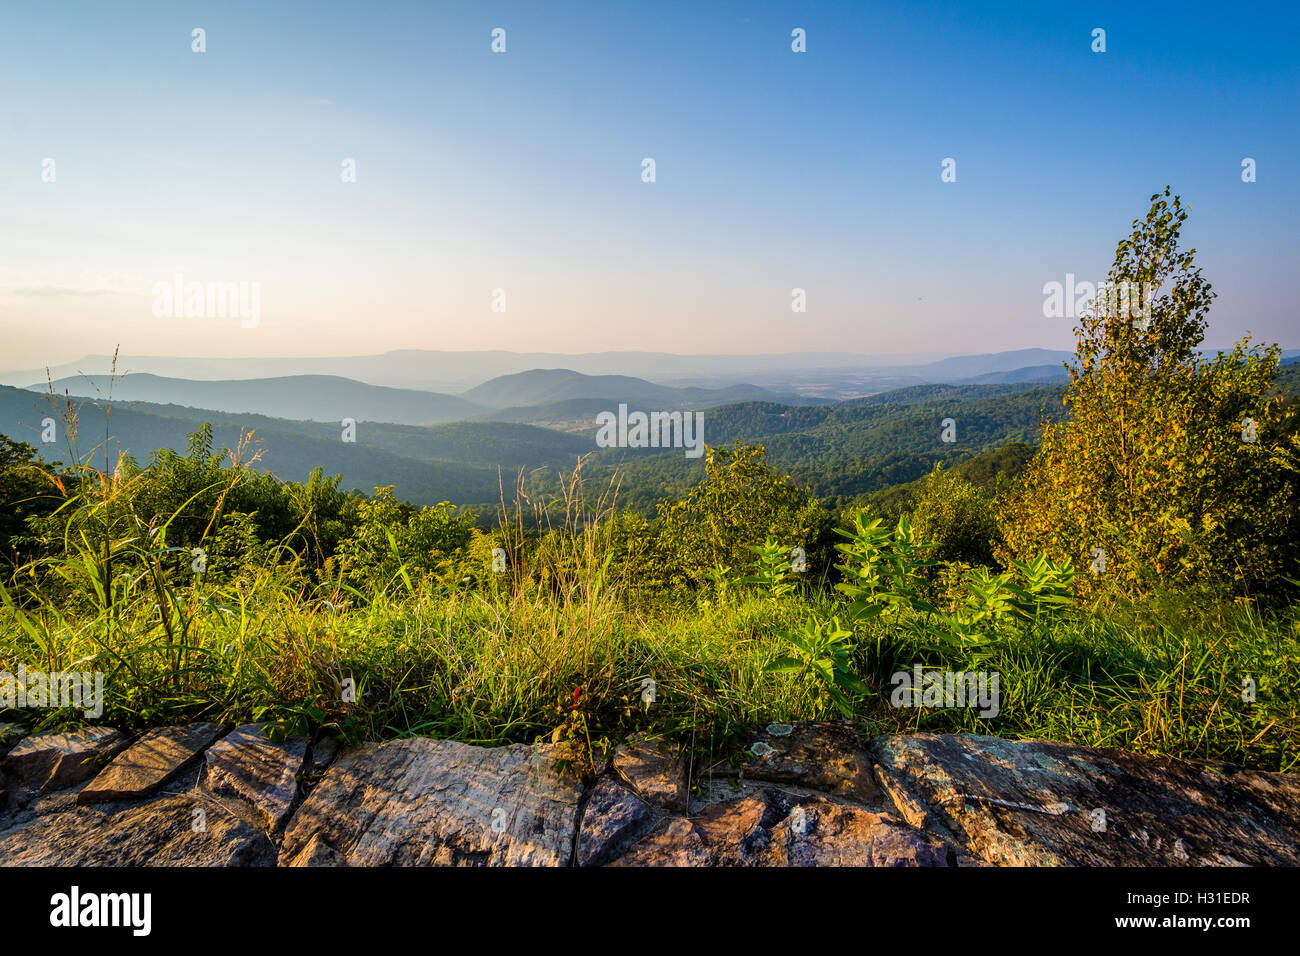 View of the Blue Ridge Mountains from Skyline Drive, in Shenandoah National Park, Virginia. Stock Photo